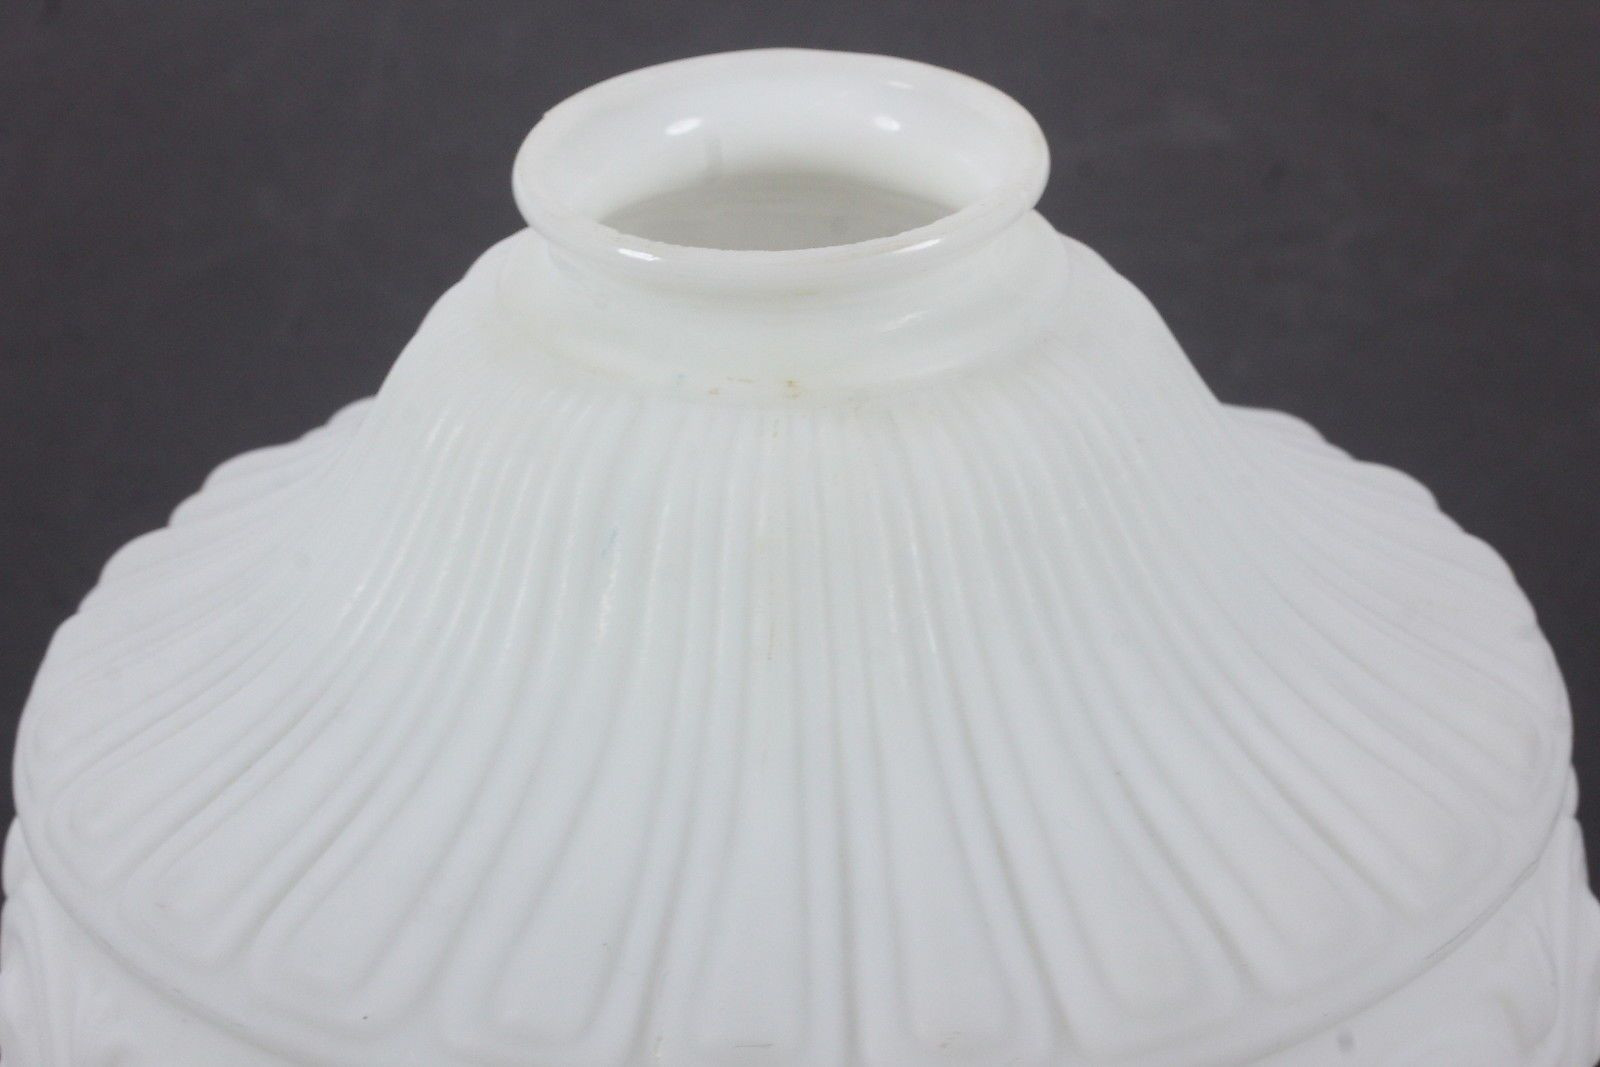 25 Wonderful Vintage Milk Glass Hobnail Vase 2024 free download vintage milk glass hobnail vase of light shades parts rooftop antiques with antique white glass satin finish light shade sconce 2 1 4 fitter 7 diam 5 t